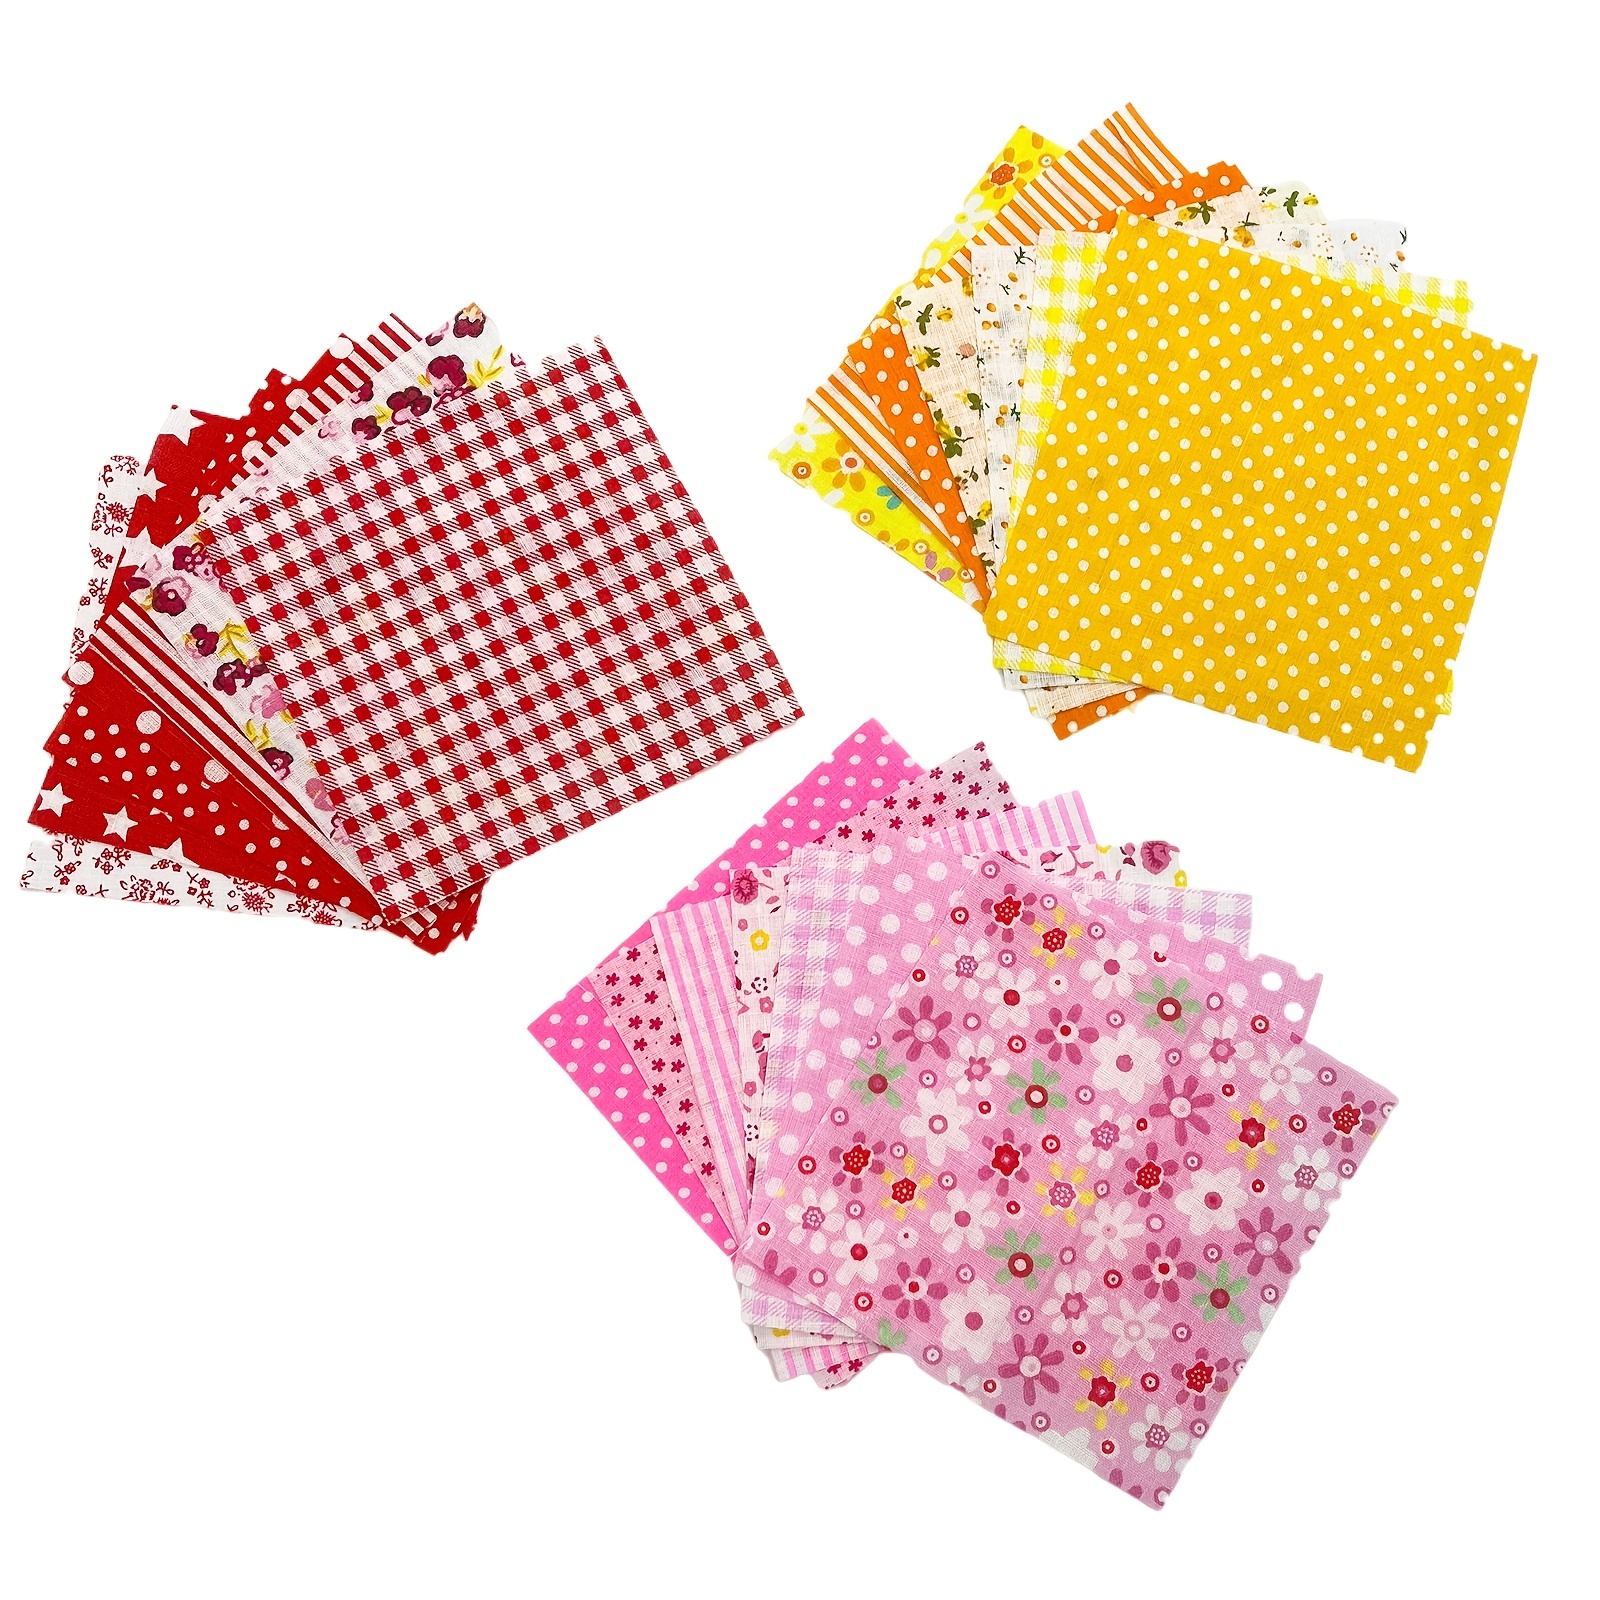 Precut Fabric Squares Misscrafts 200 PCS 4 x 4 inches Cotton Fabric Bundle  Quilting Charm Pack for Quilting Sewing Craft Patchwork